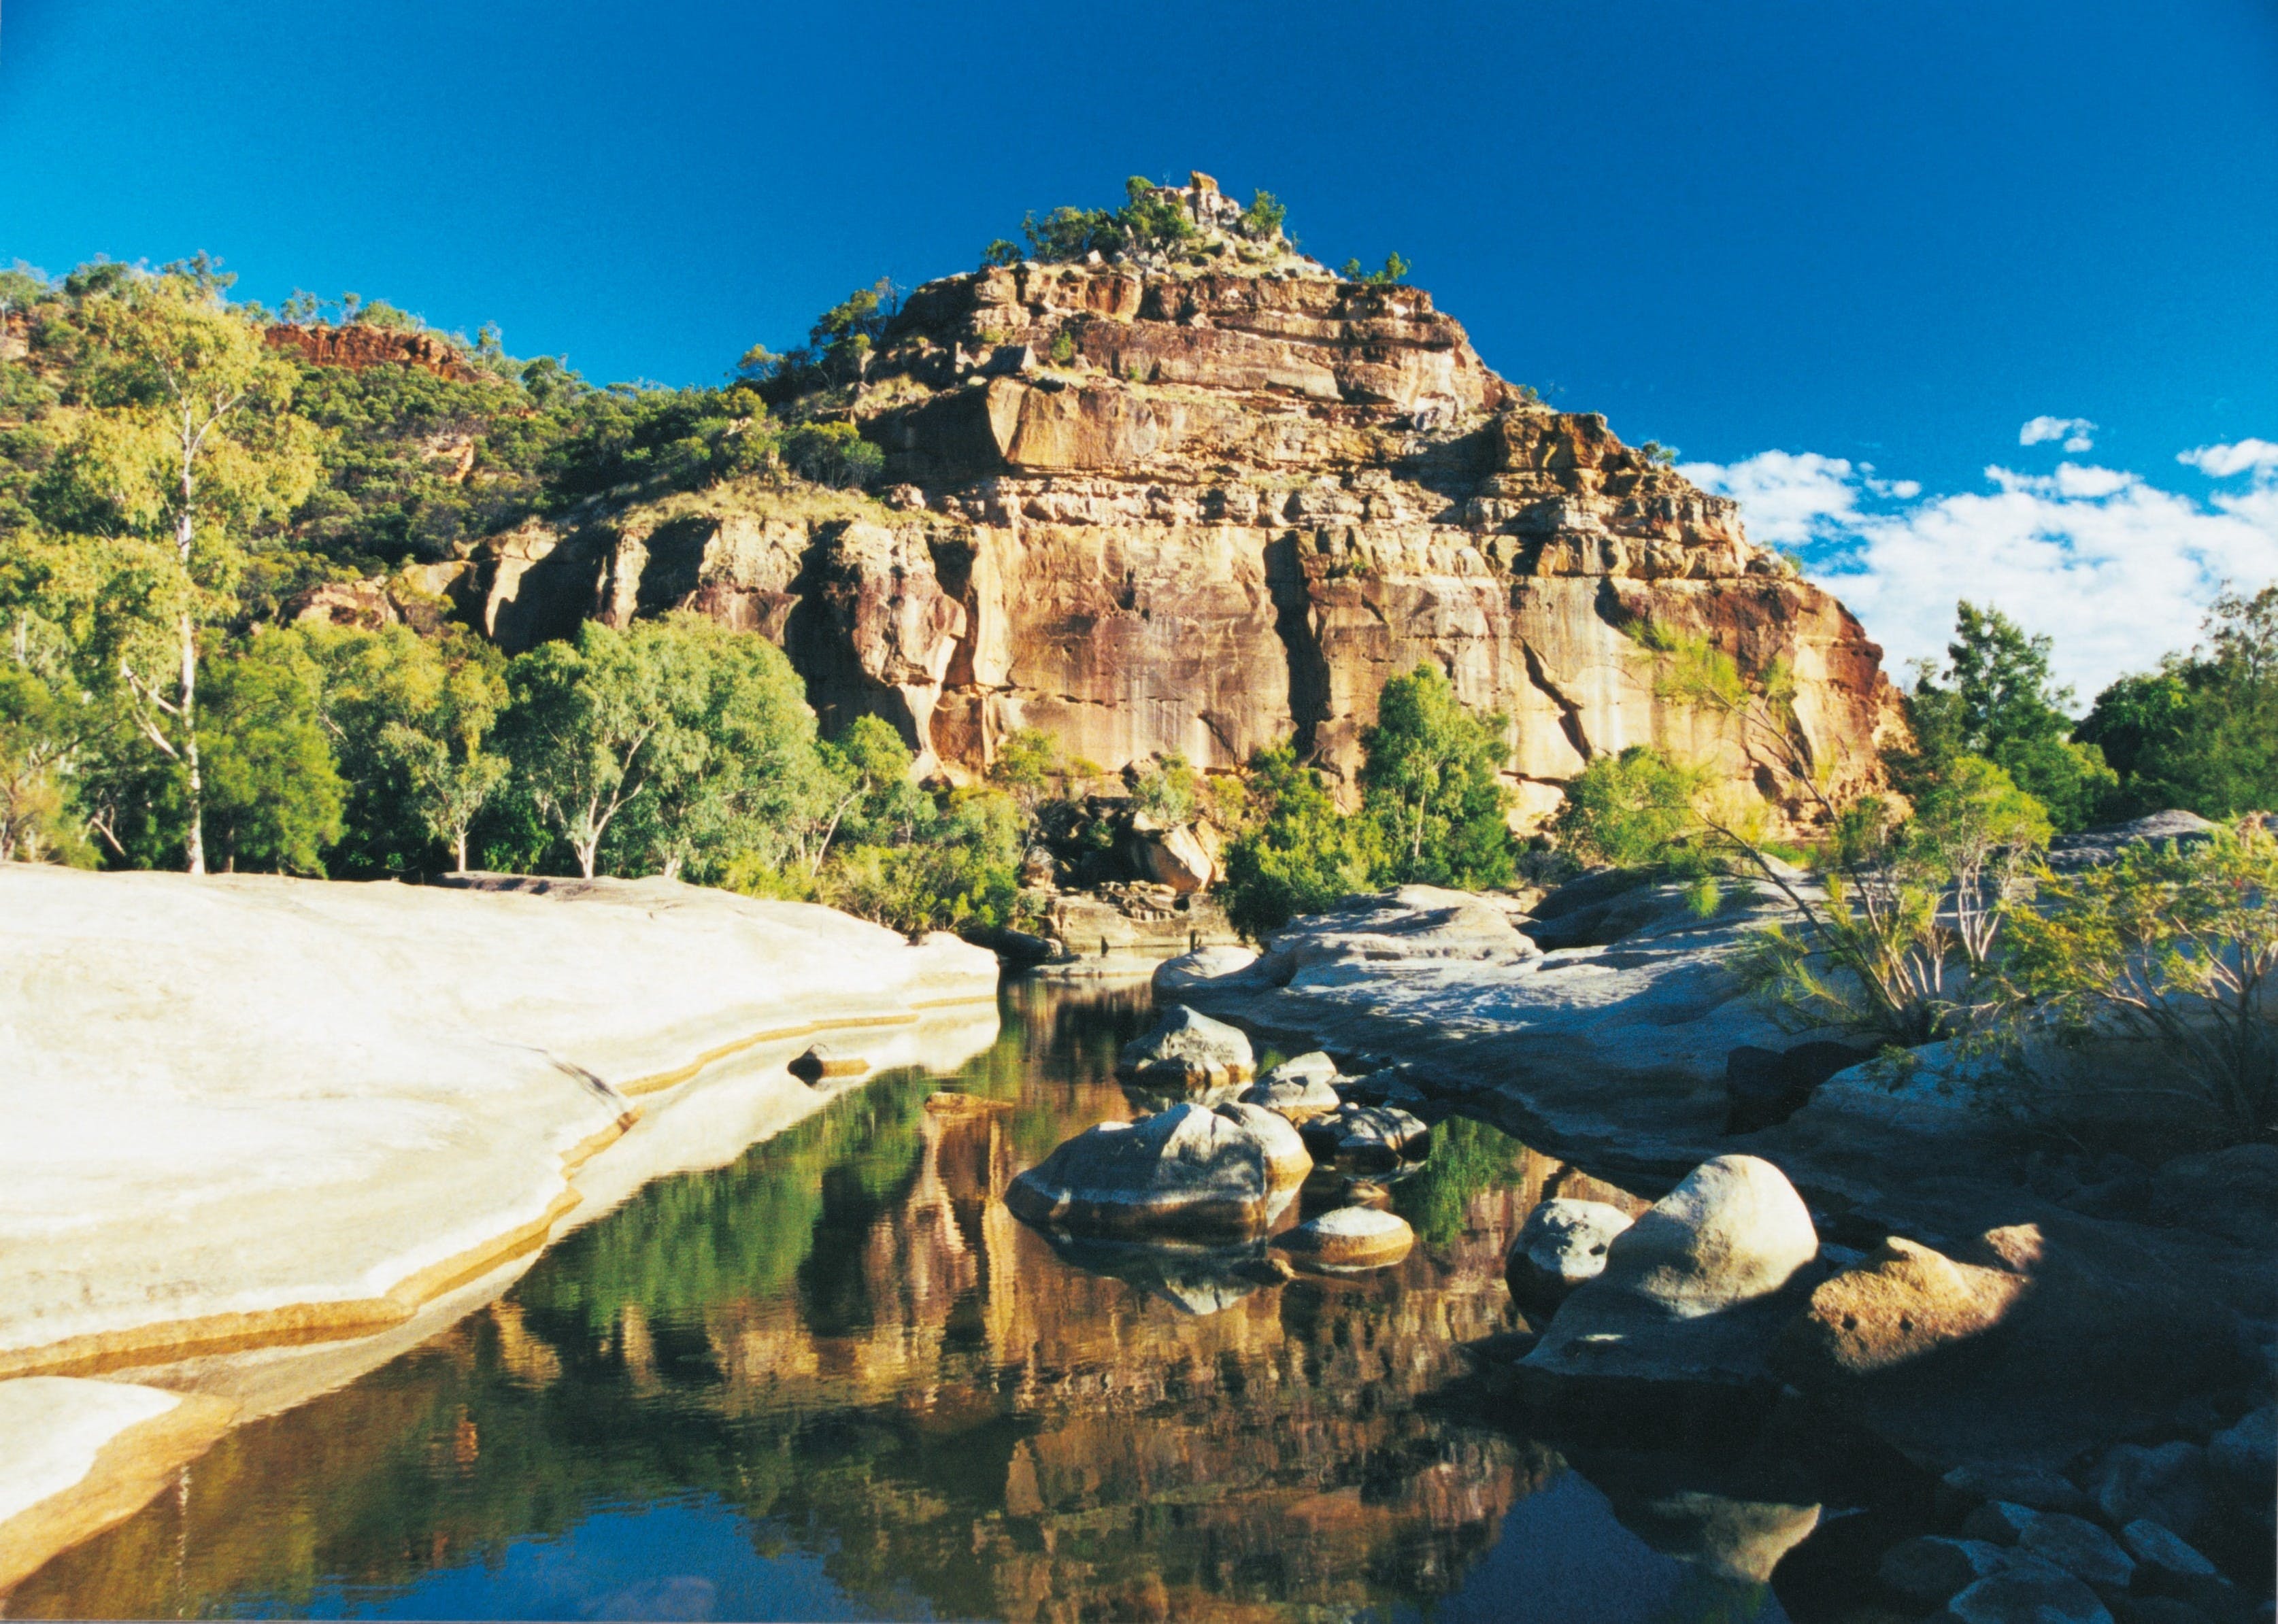 Porcupine Gorge National Park - Find Attractions